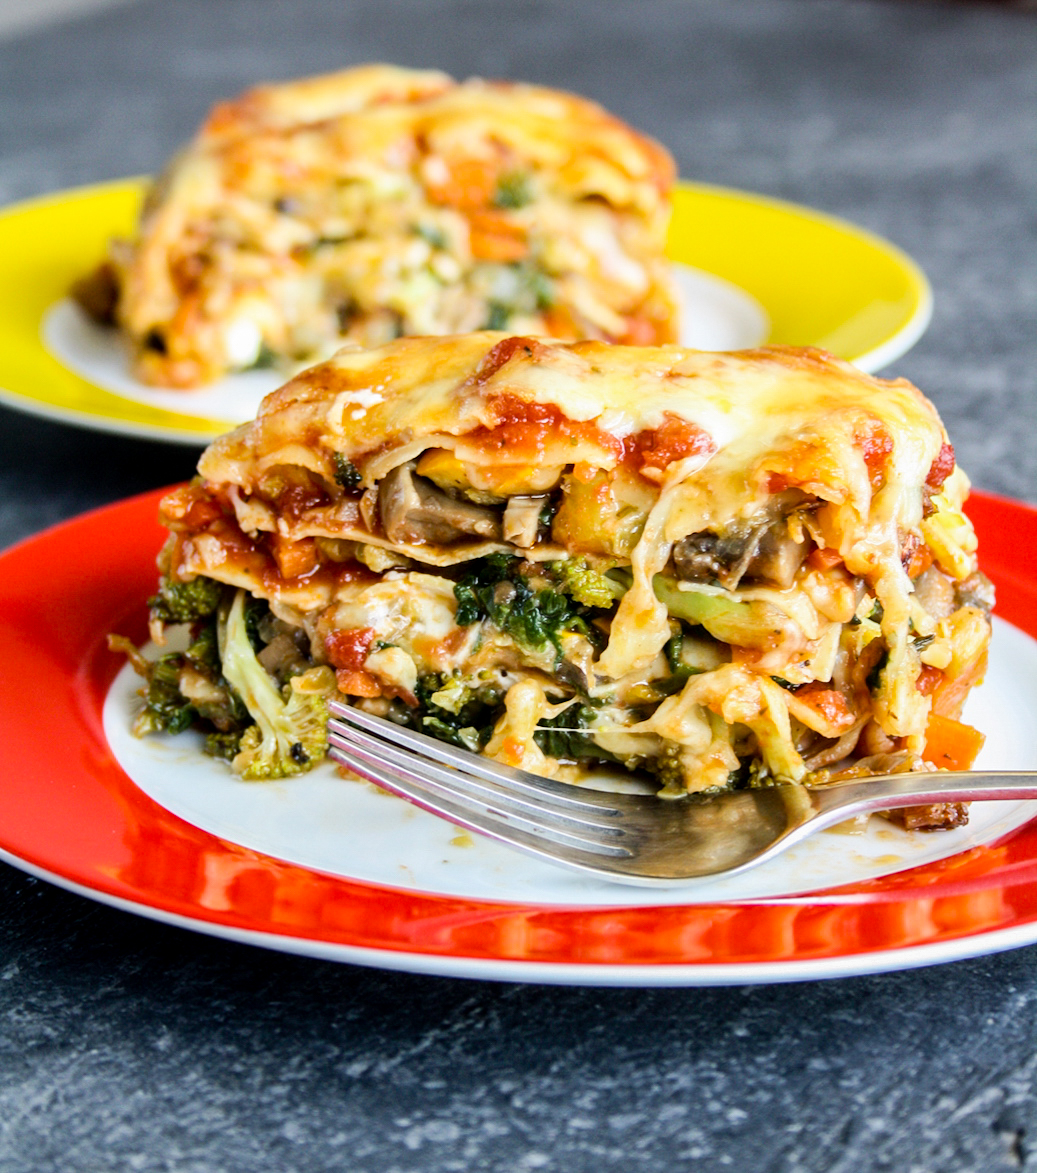 An easy, cheesy lasagna with spinach, mushrooms, zucchini, carrots and broccoli